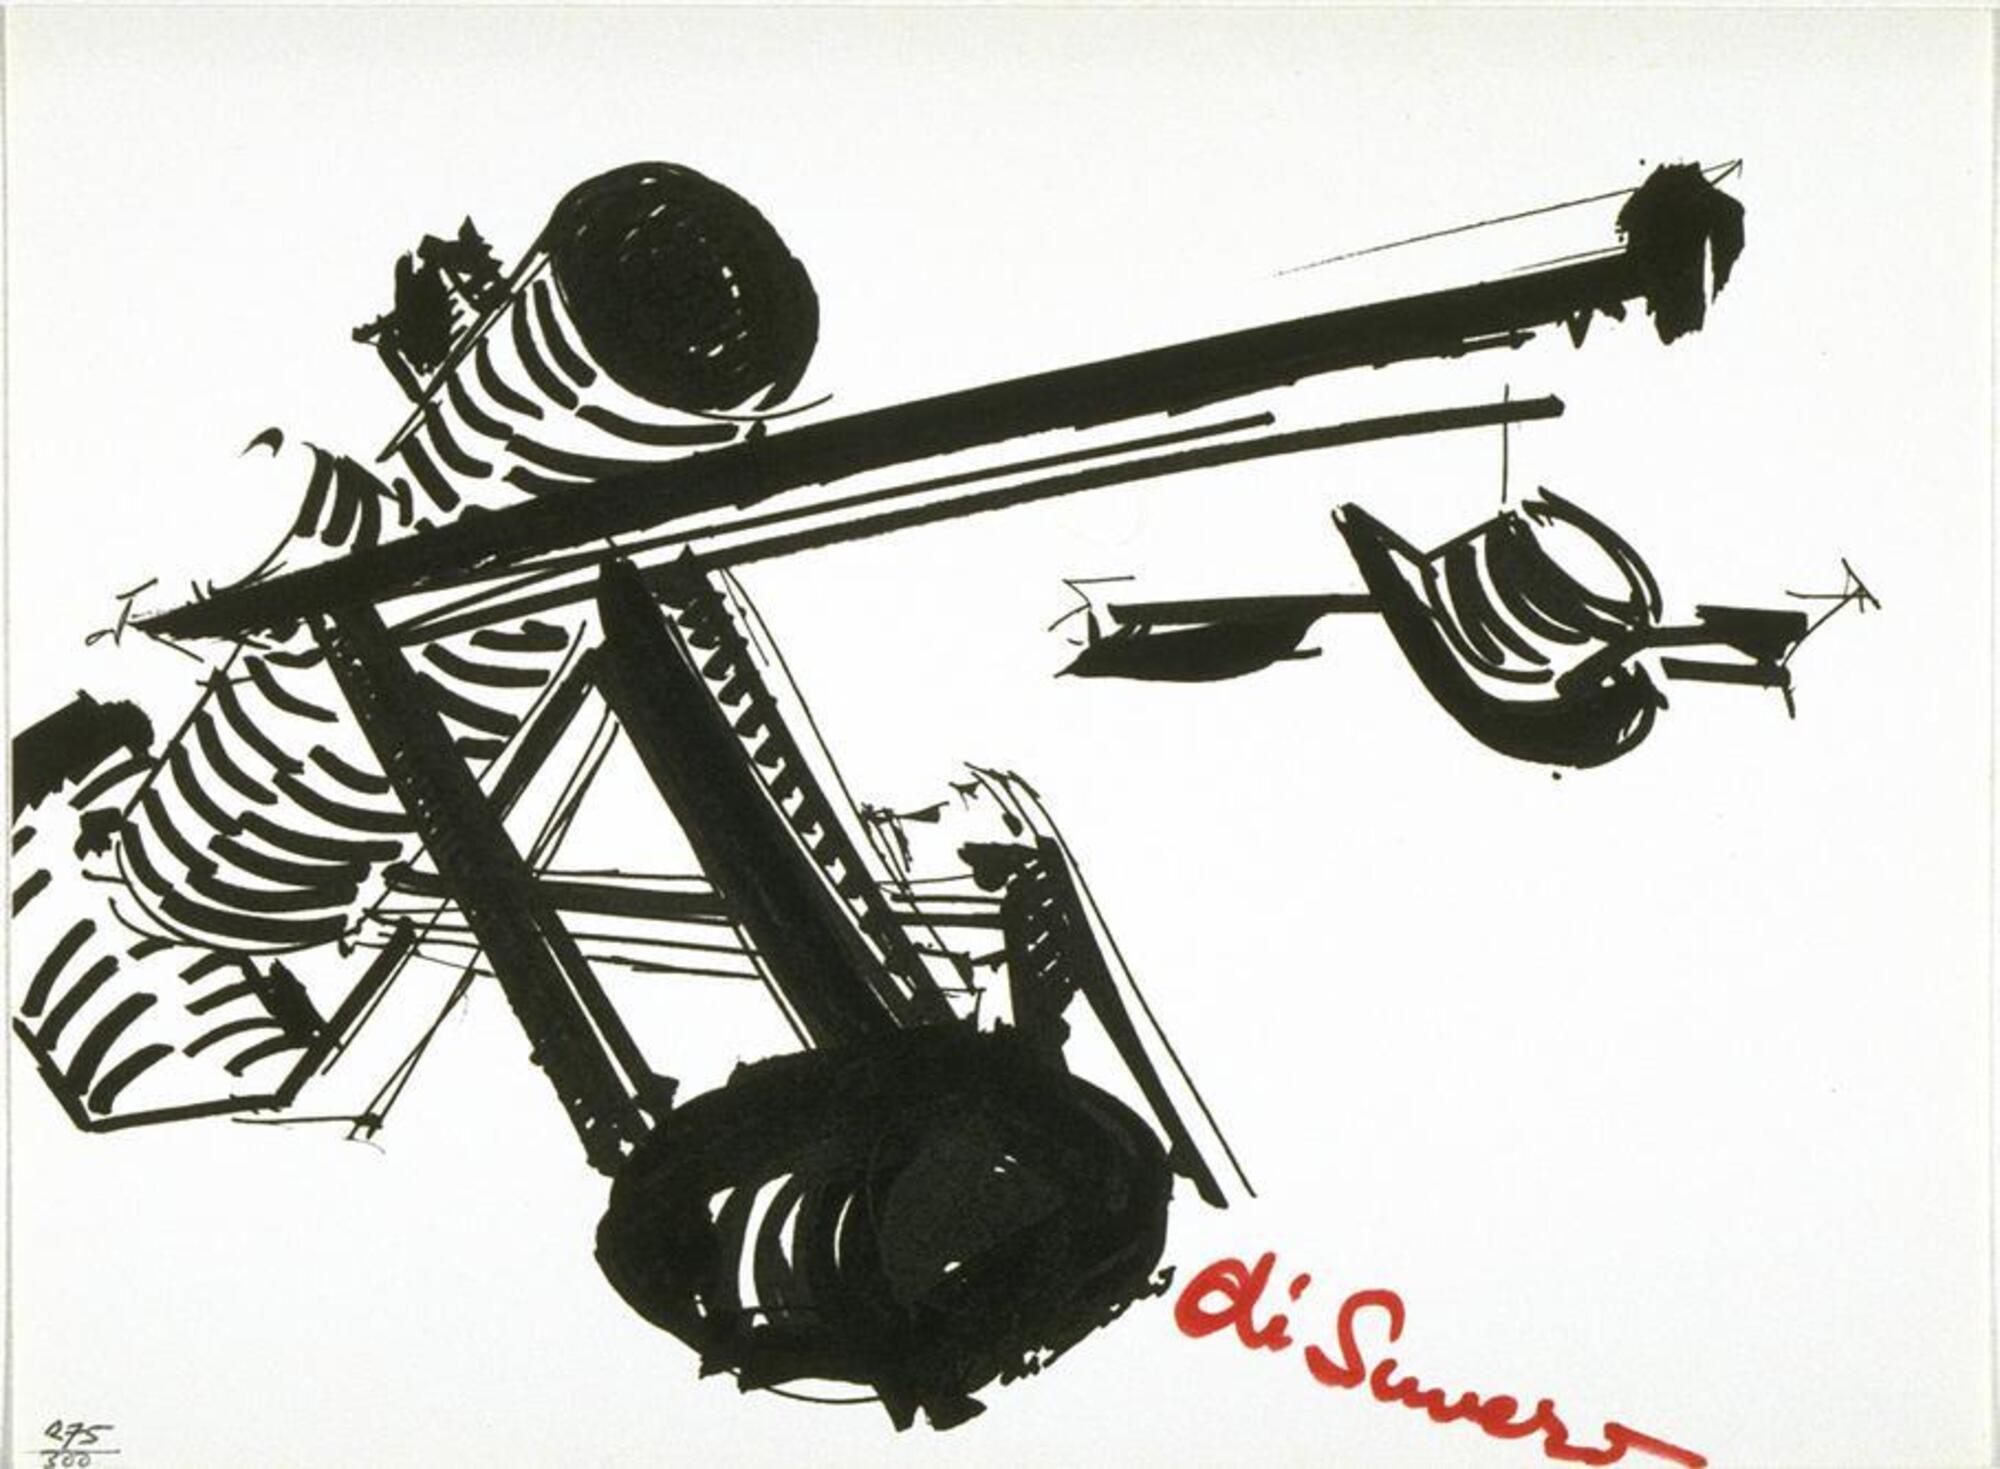 This black and white print shows what could be a loose collection of hardware such as nuts and bolts, with the artist&#39;s signature in red beneath.&nbsp;